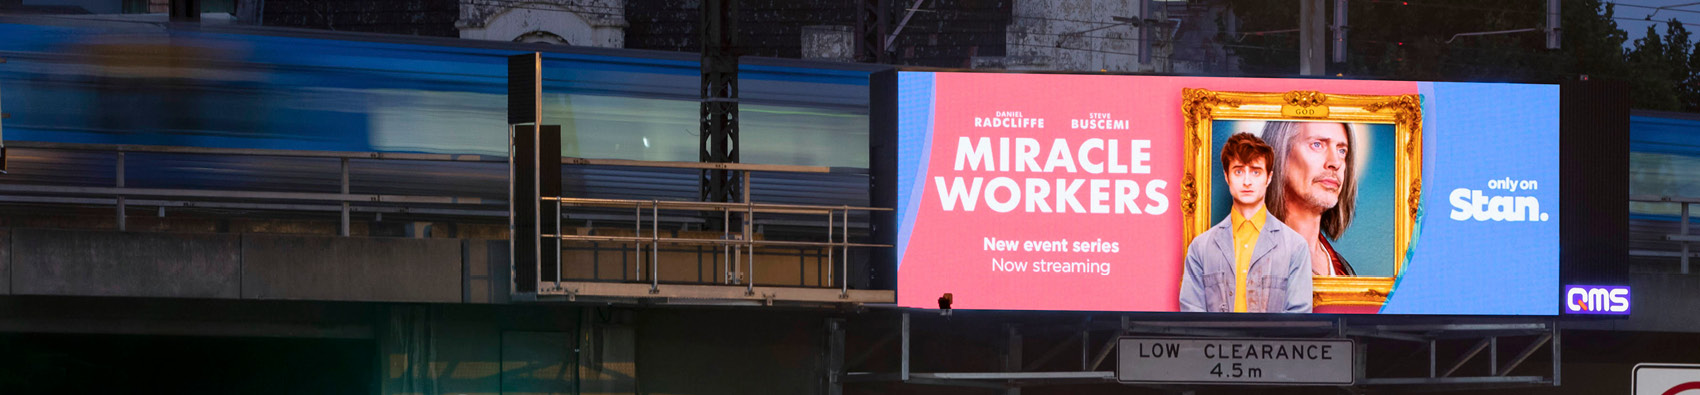 A billboard showing an ad for a TV show streaming on Stan. In the background is a rail bridge with a train passing through it.